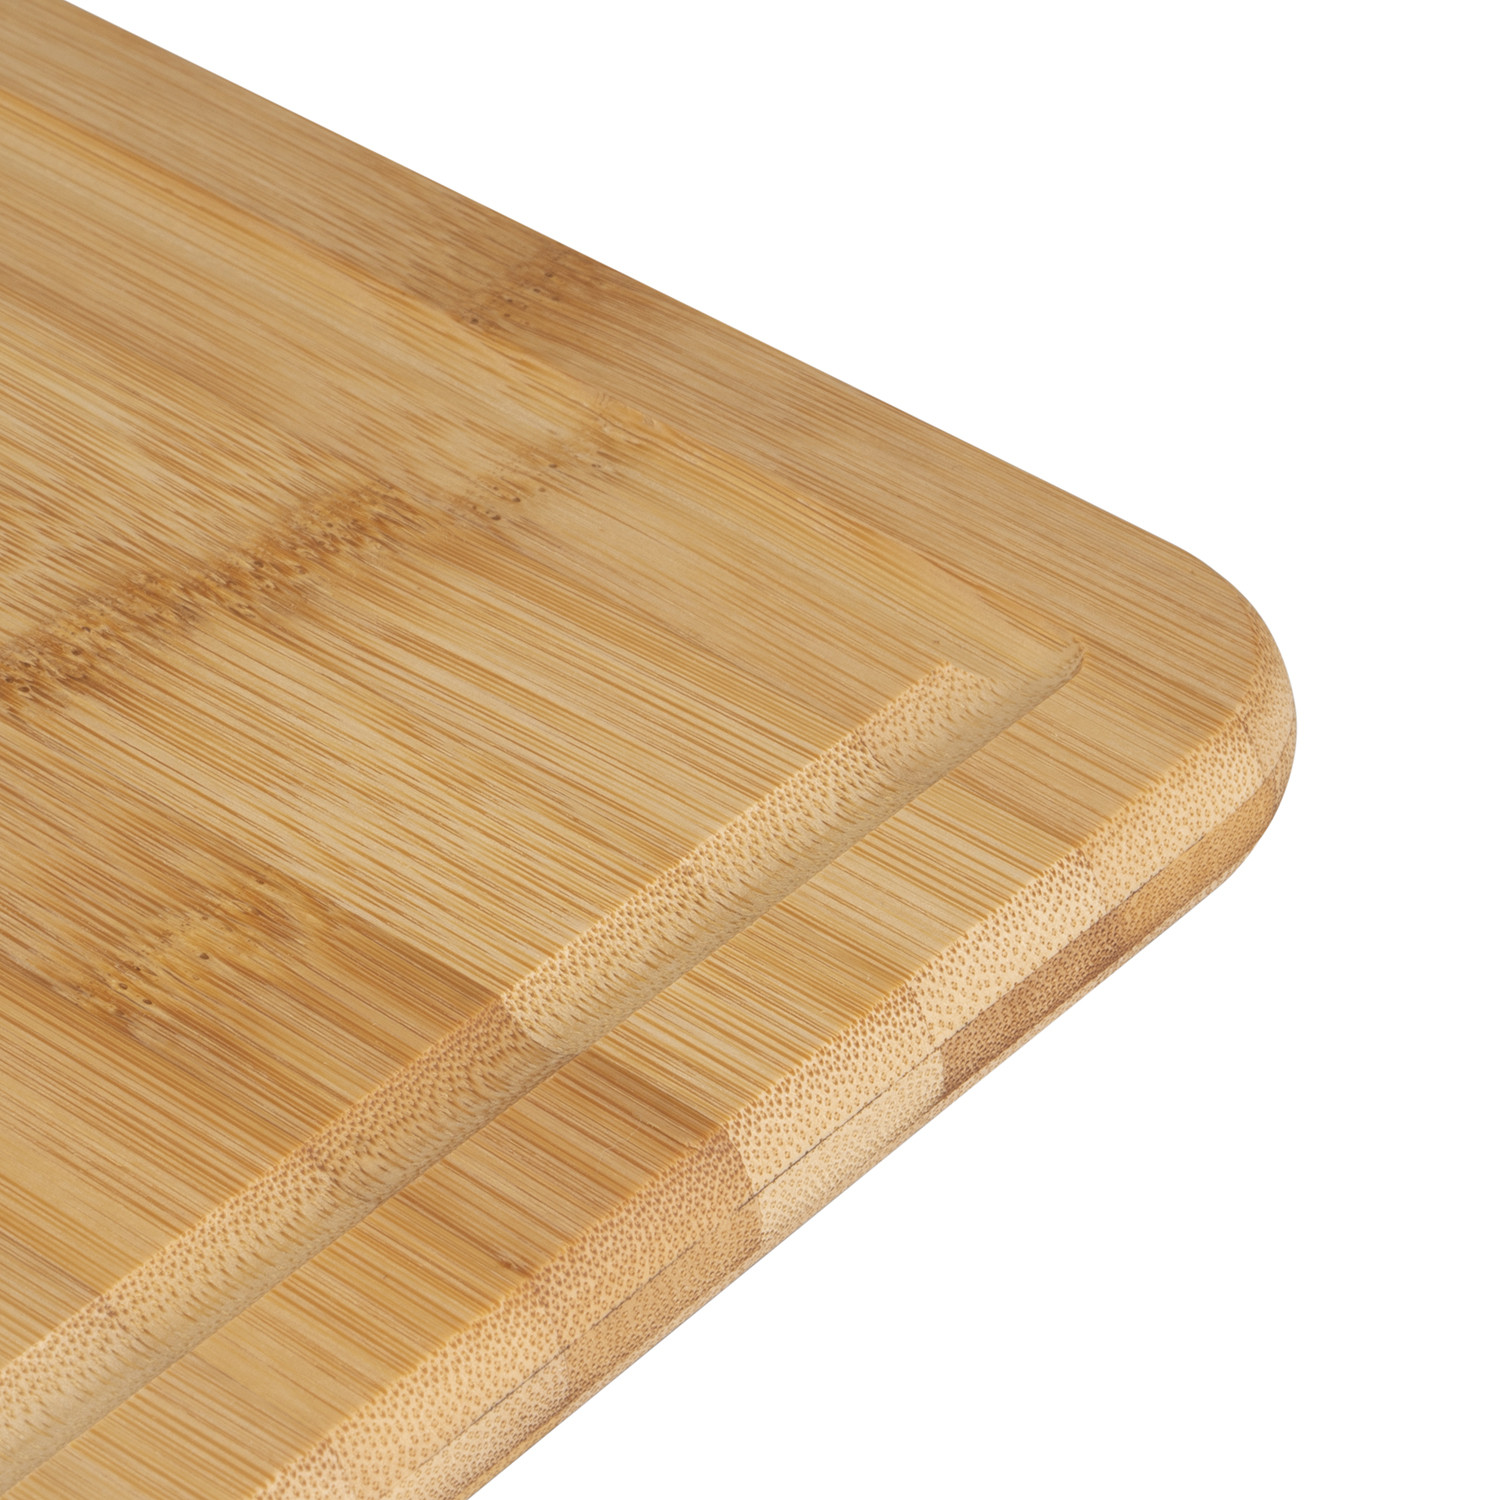 Bamboo Chopping Board with Wire Handle - Small Image 3